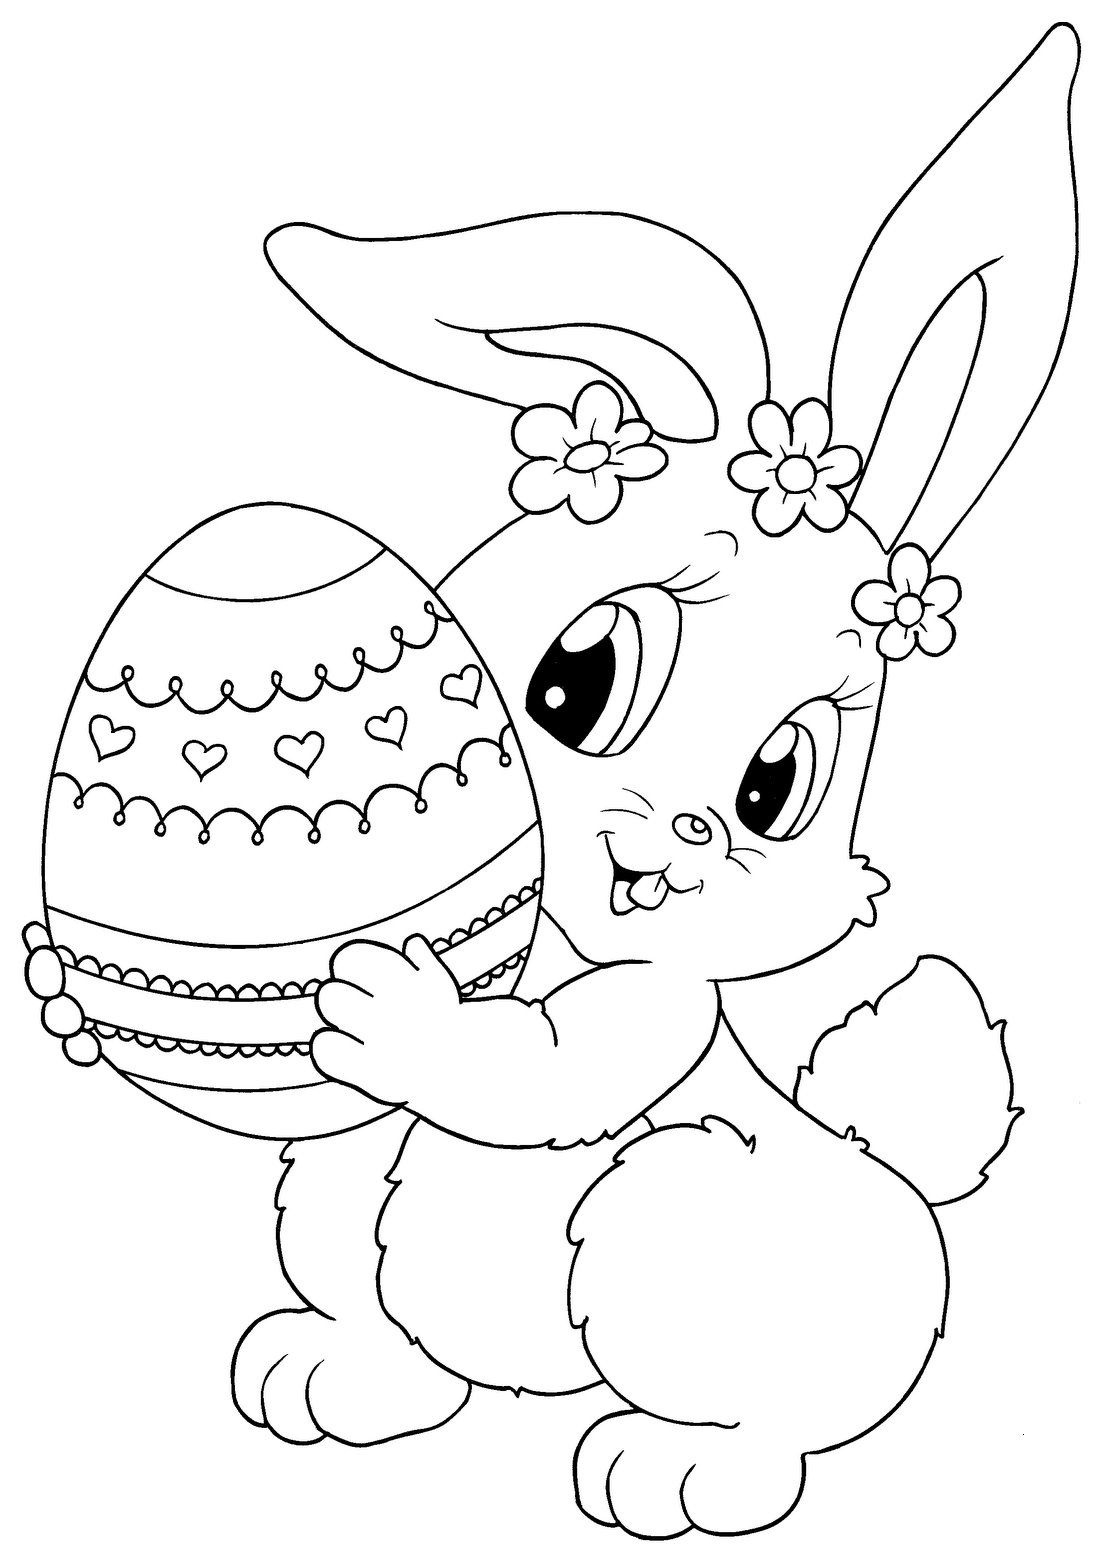 7 Places For Free, Printable Easter Egg Coloring Pages - Free Printable ...